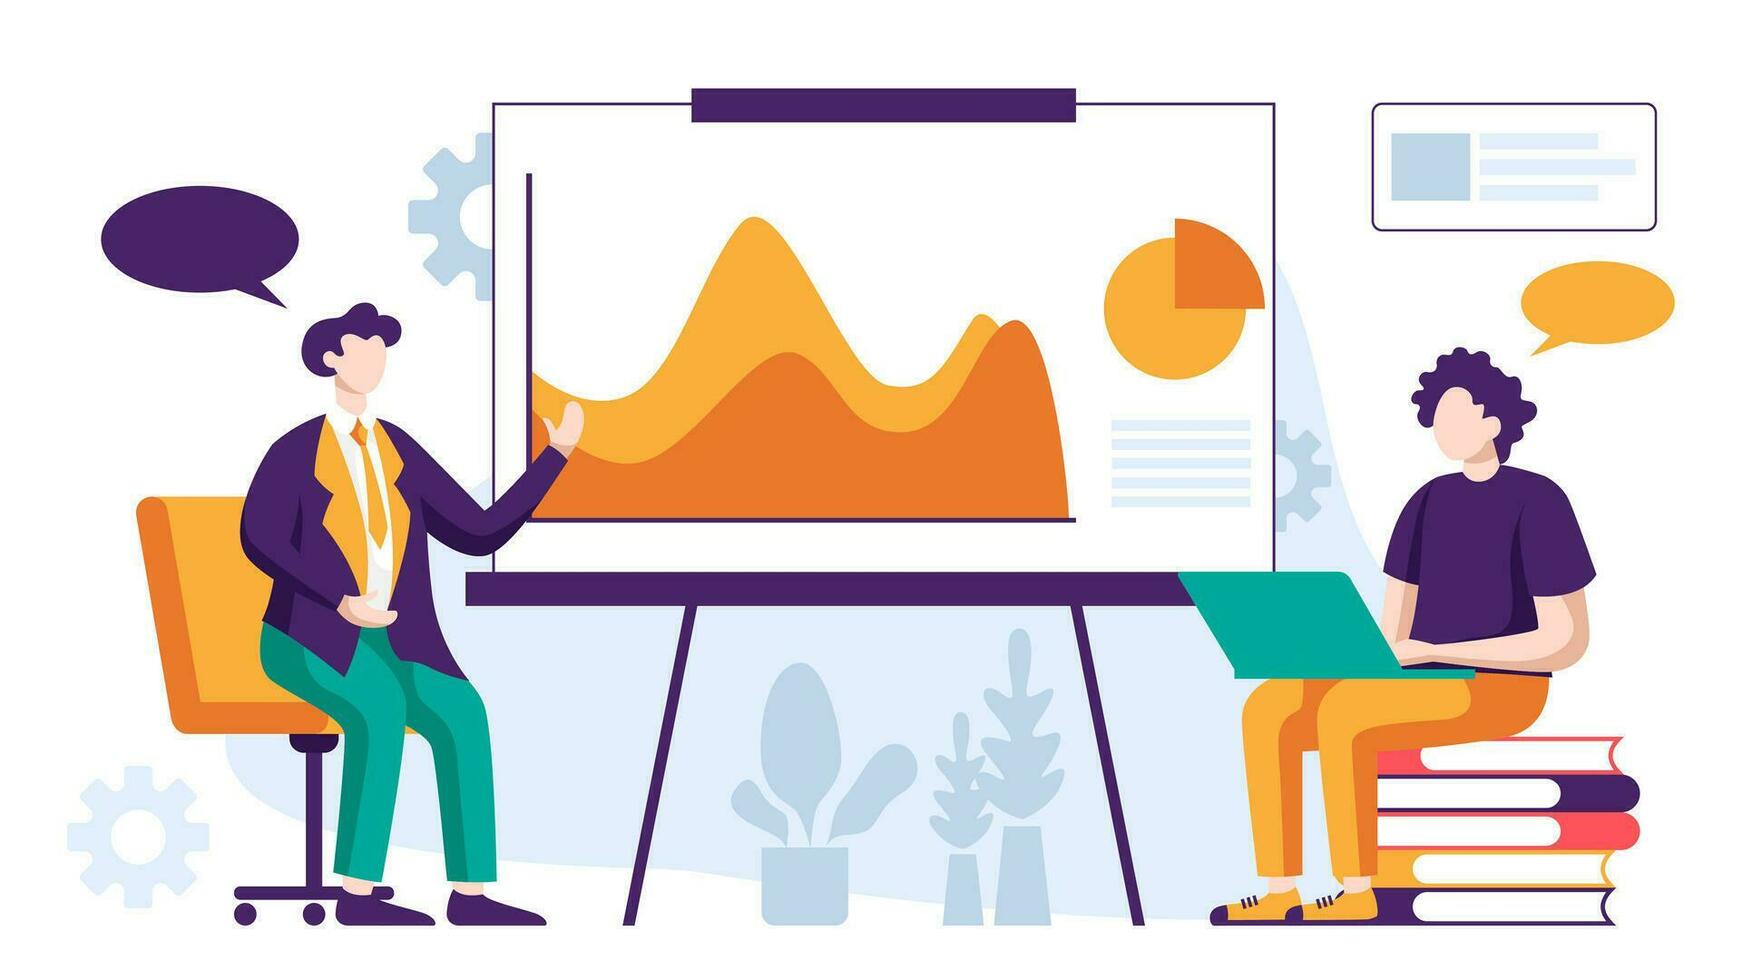 Business people are working together doing meeting, reporting data and brainstorming about marketing strategy in office on white background vector illustration concept in flat design style